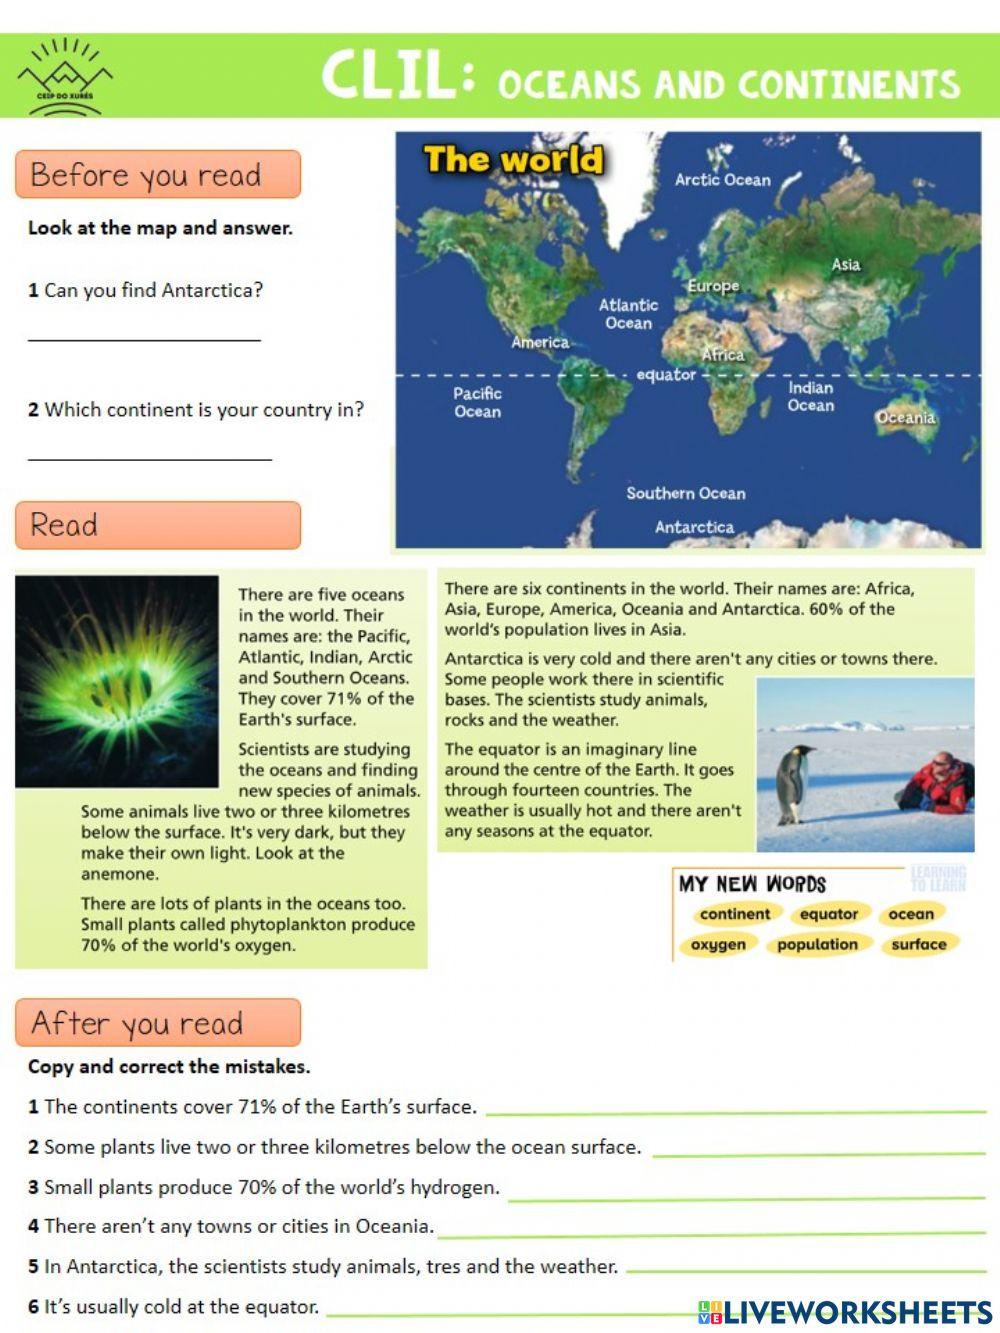 CLIL: Oceans and continents